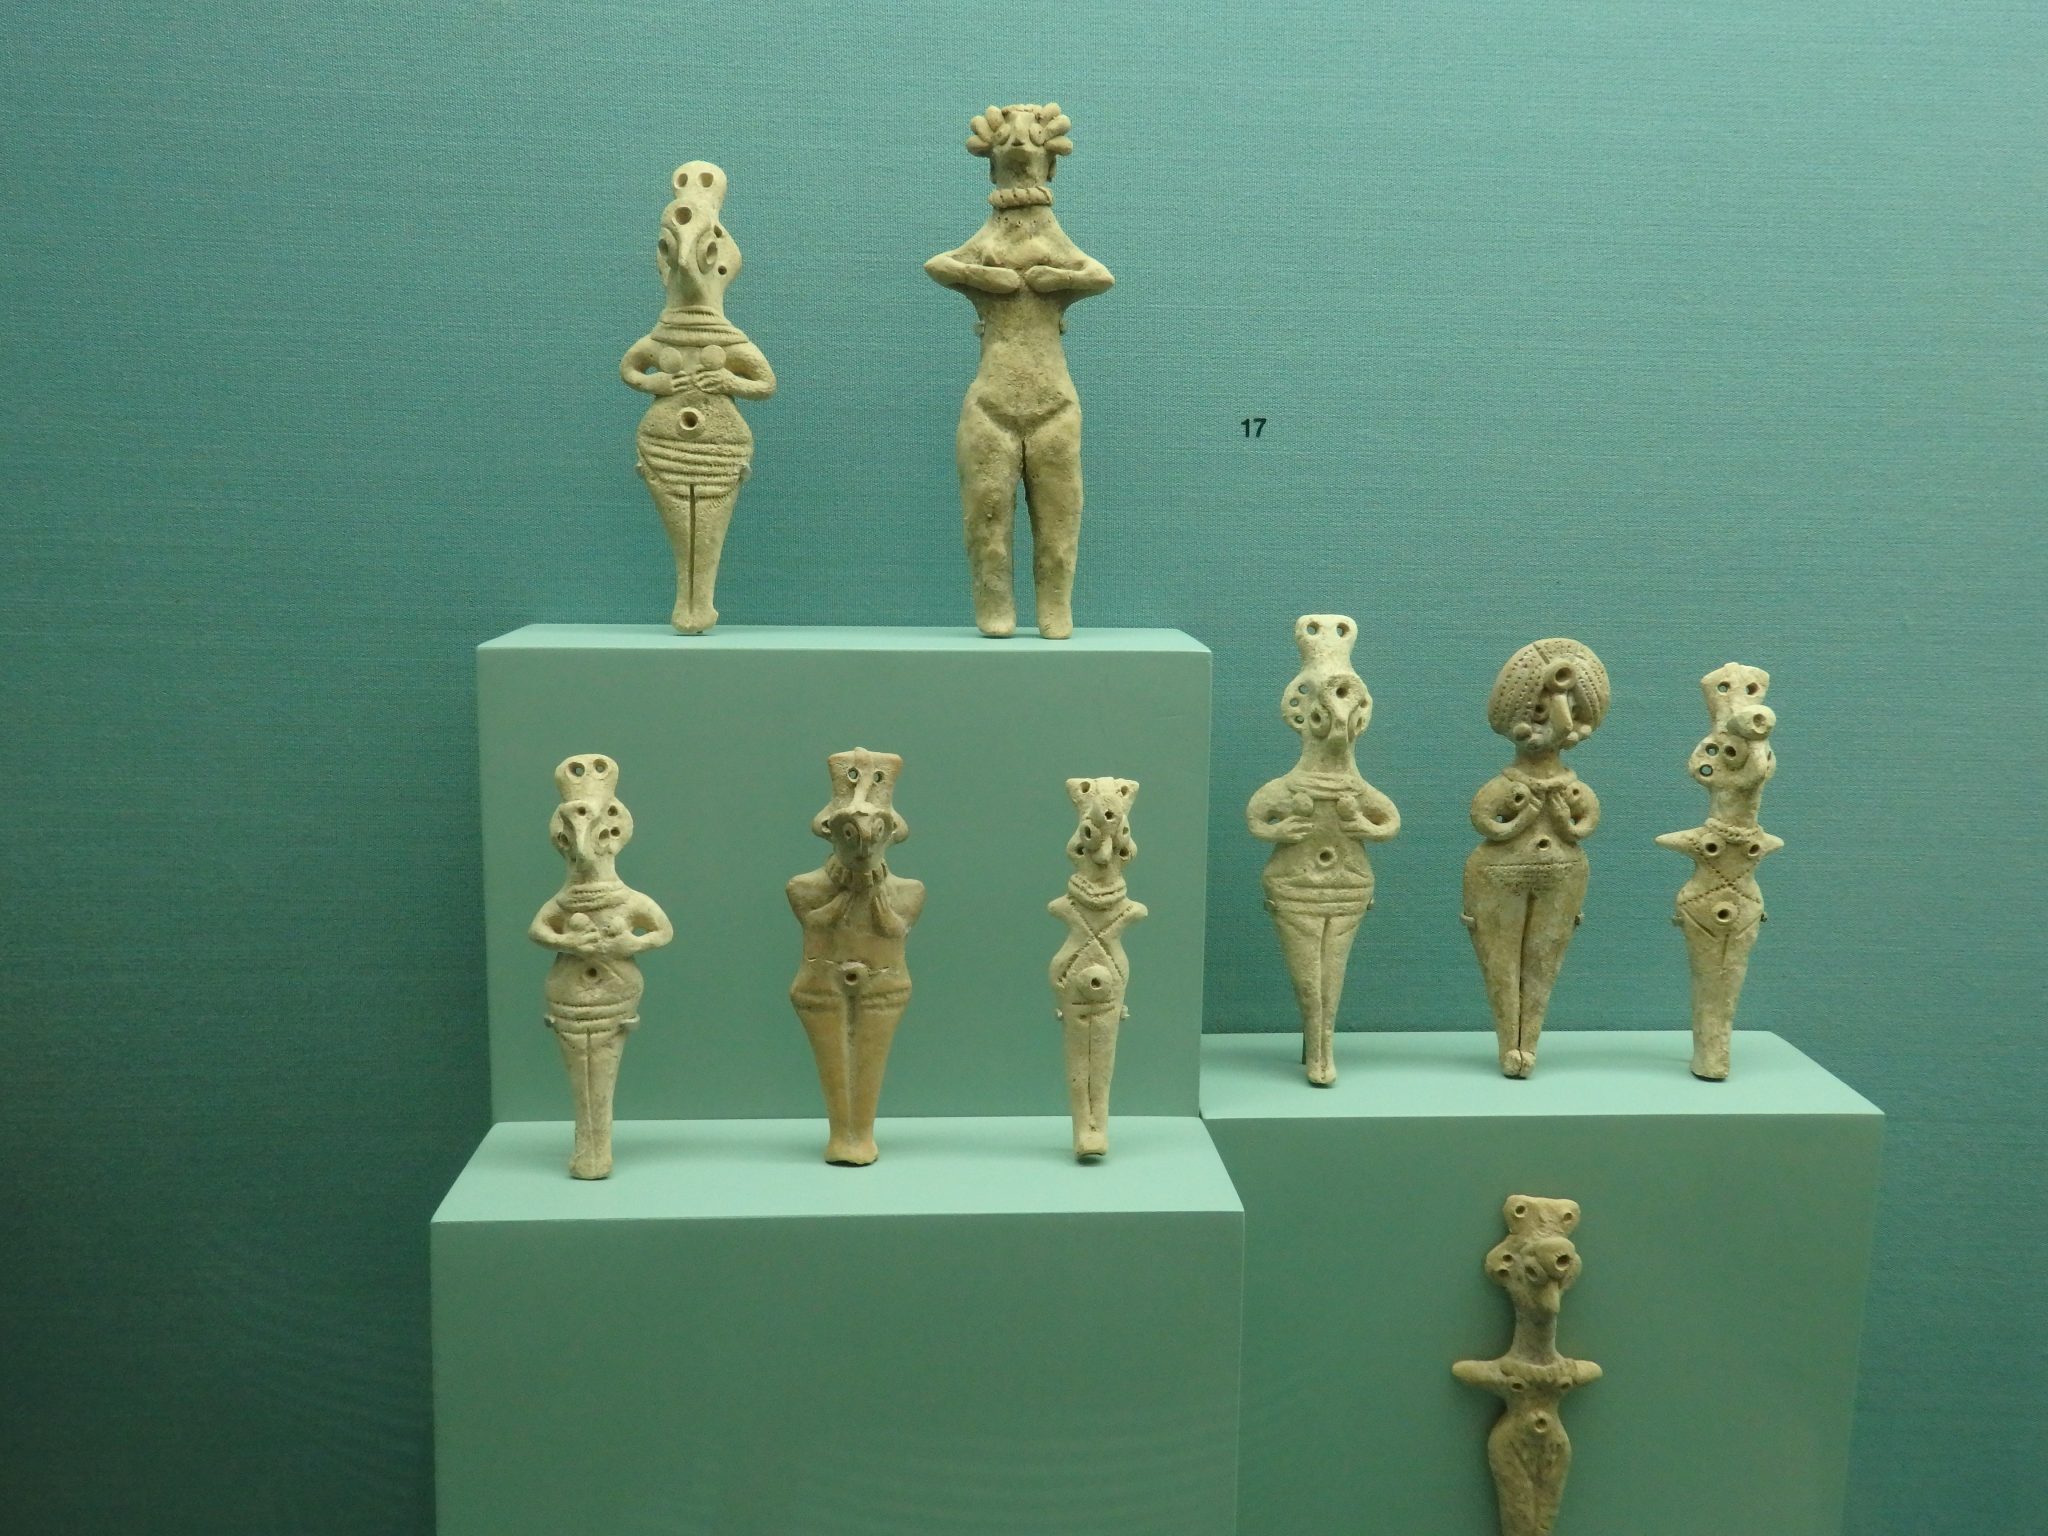 Bronze Age figurines from northern Syria, made from clay, and dating from 2000-1550 BCE in the Bible Lands Museum in Jerusalem.